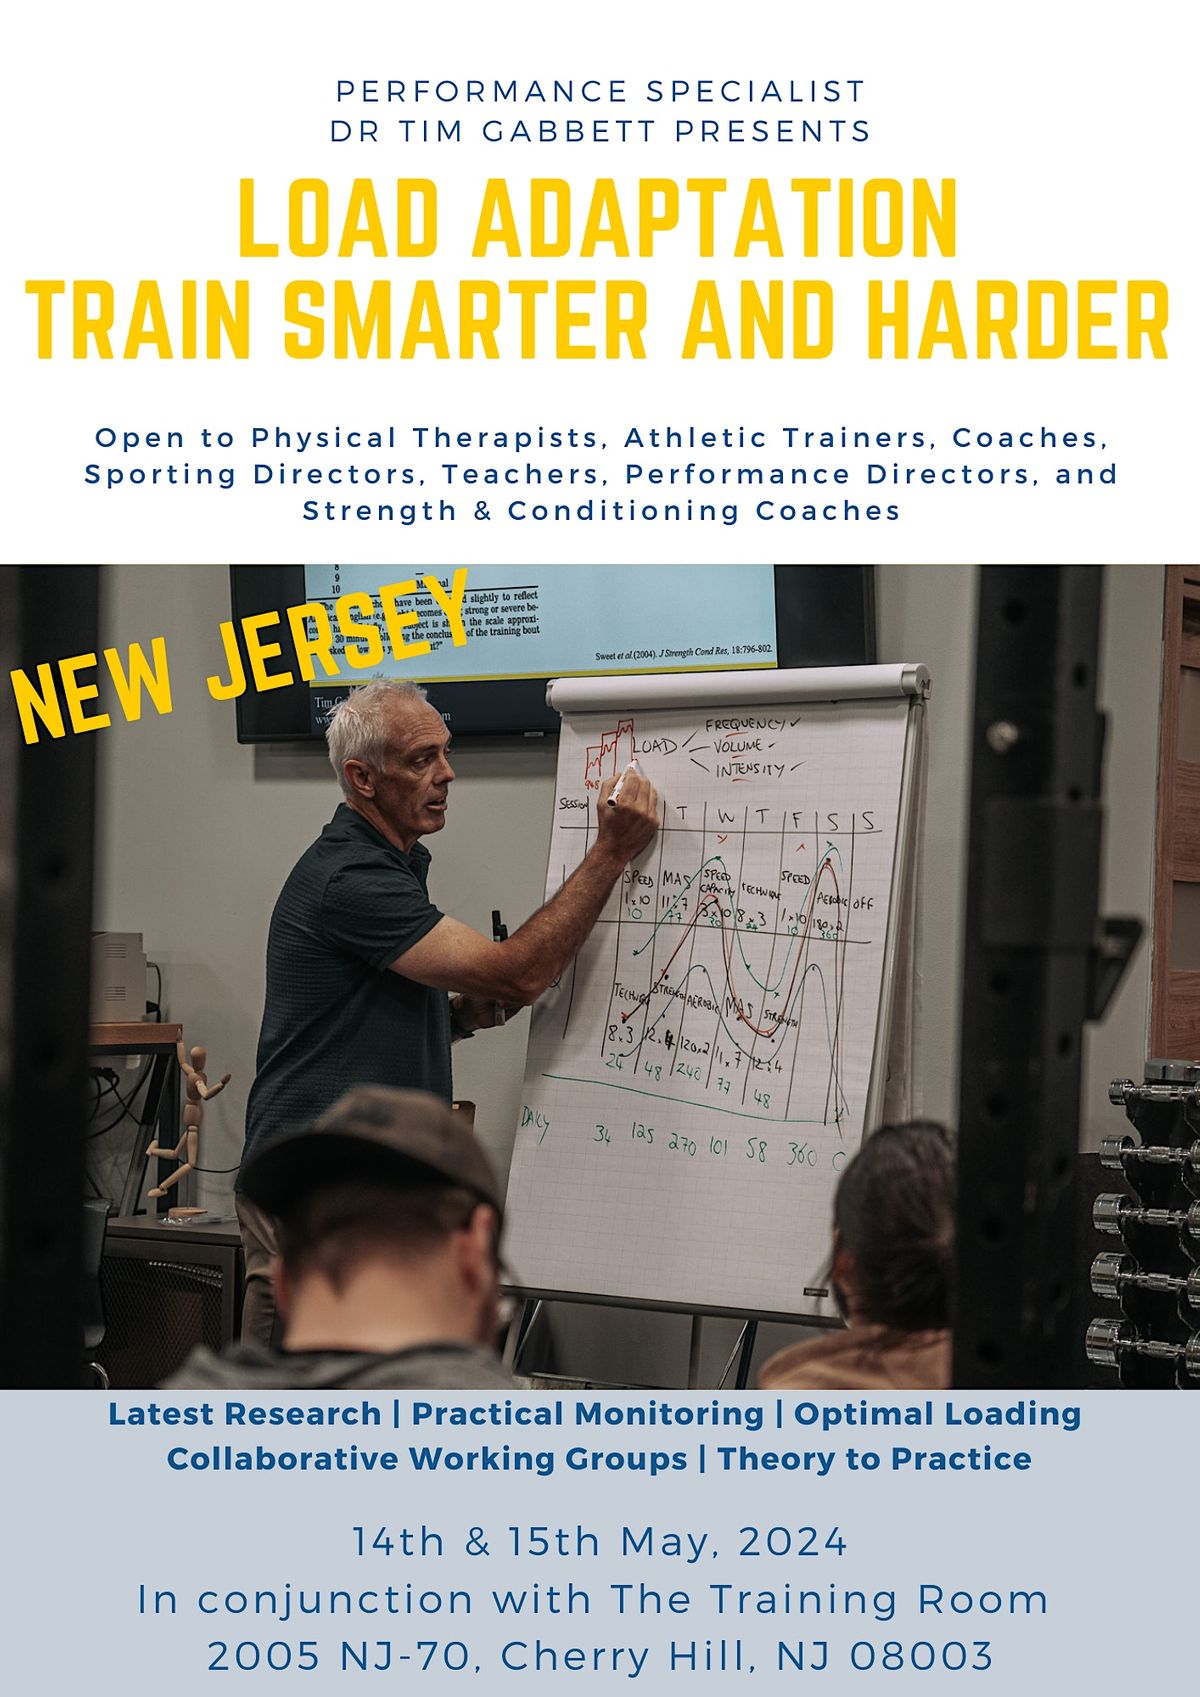 Load Adaptation - Train Smarter and Harder (New Jersey)